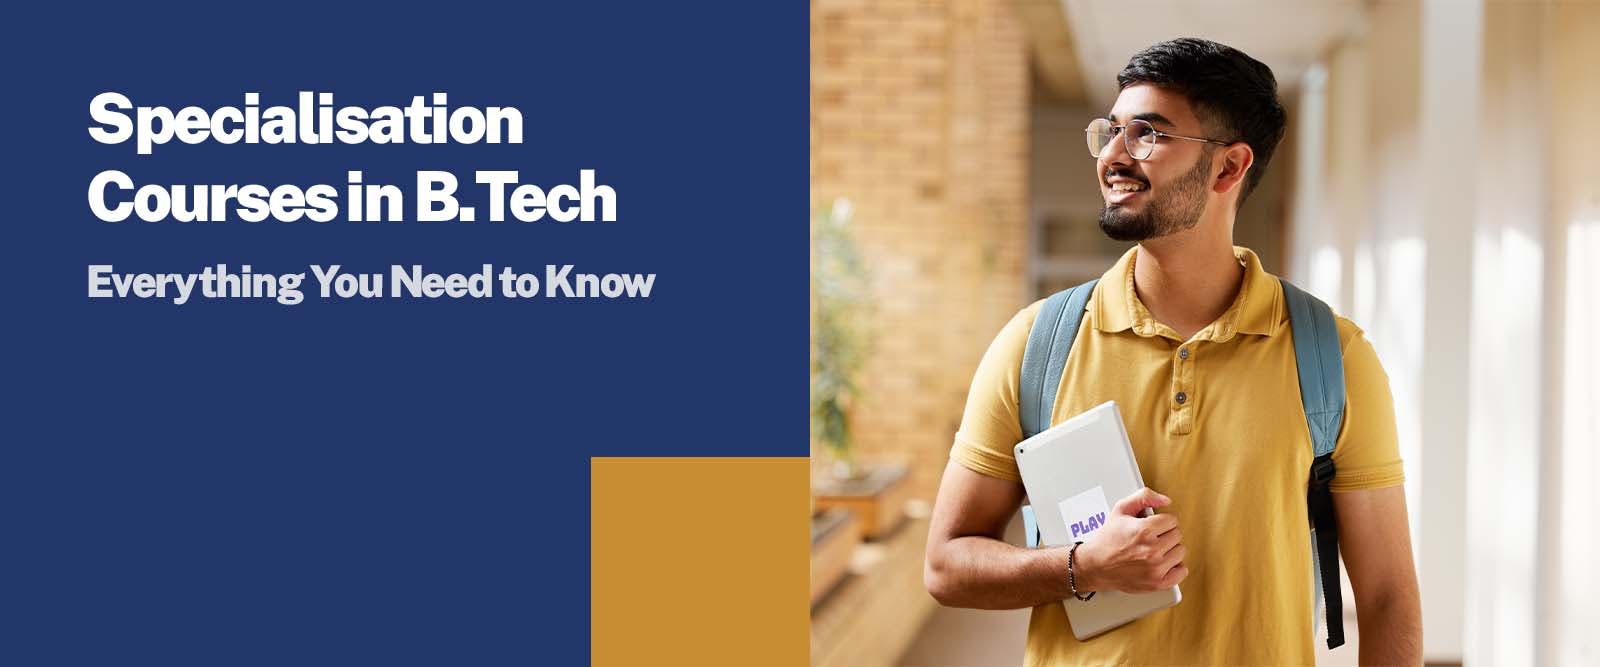 Specialisation Courses in B.Tech Everything You Need to Know